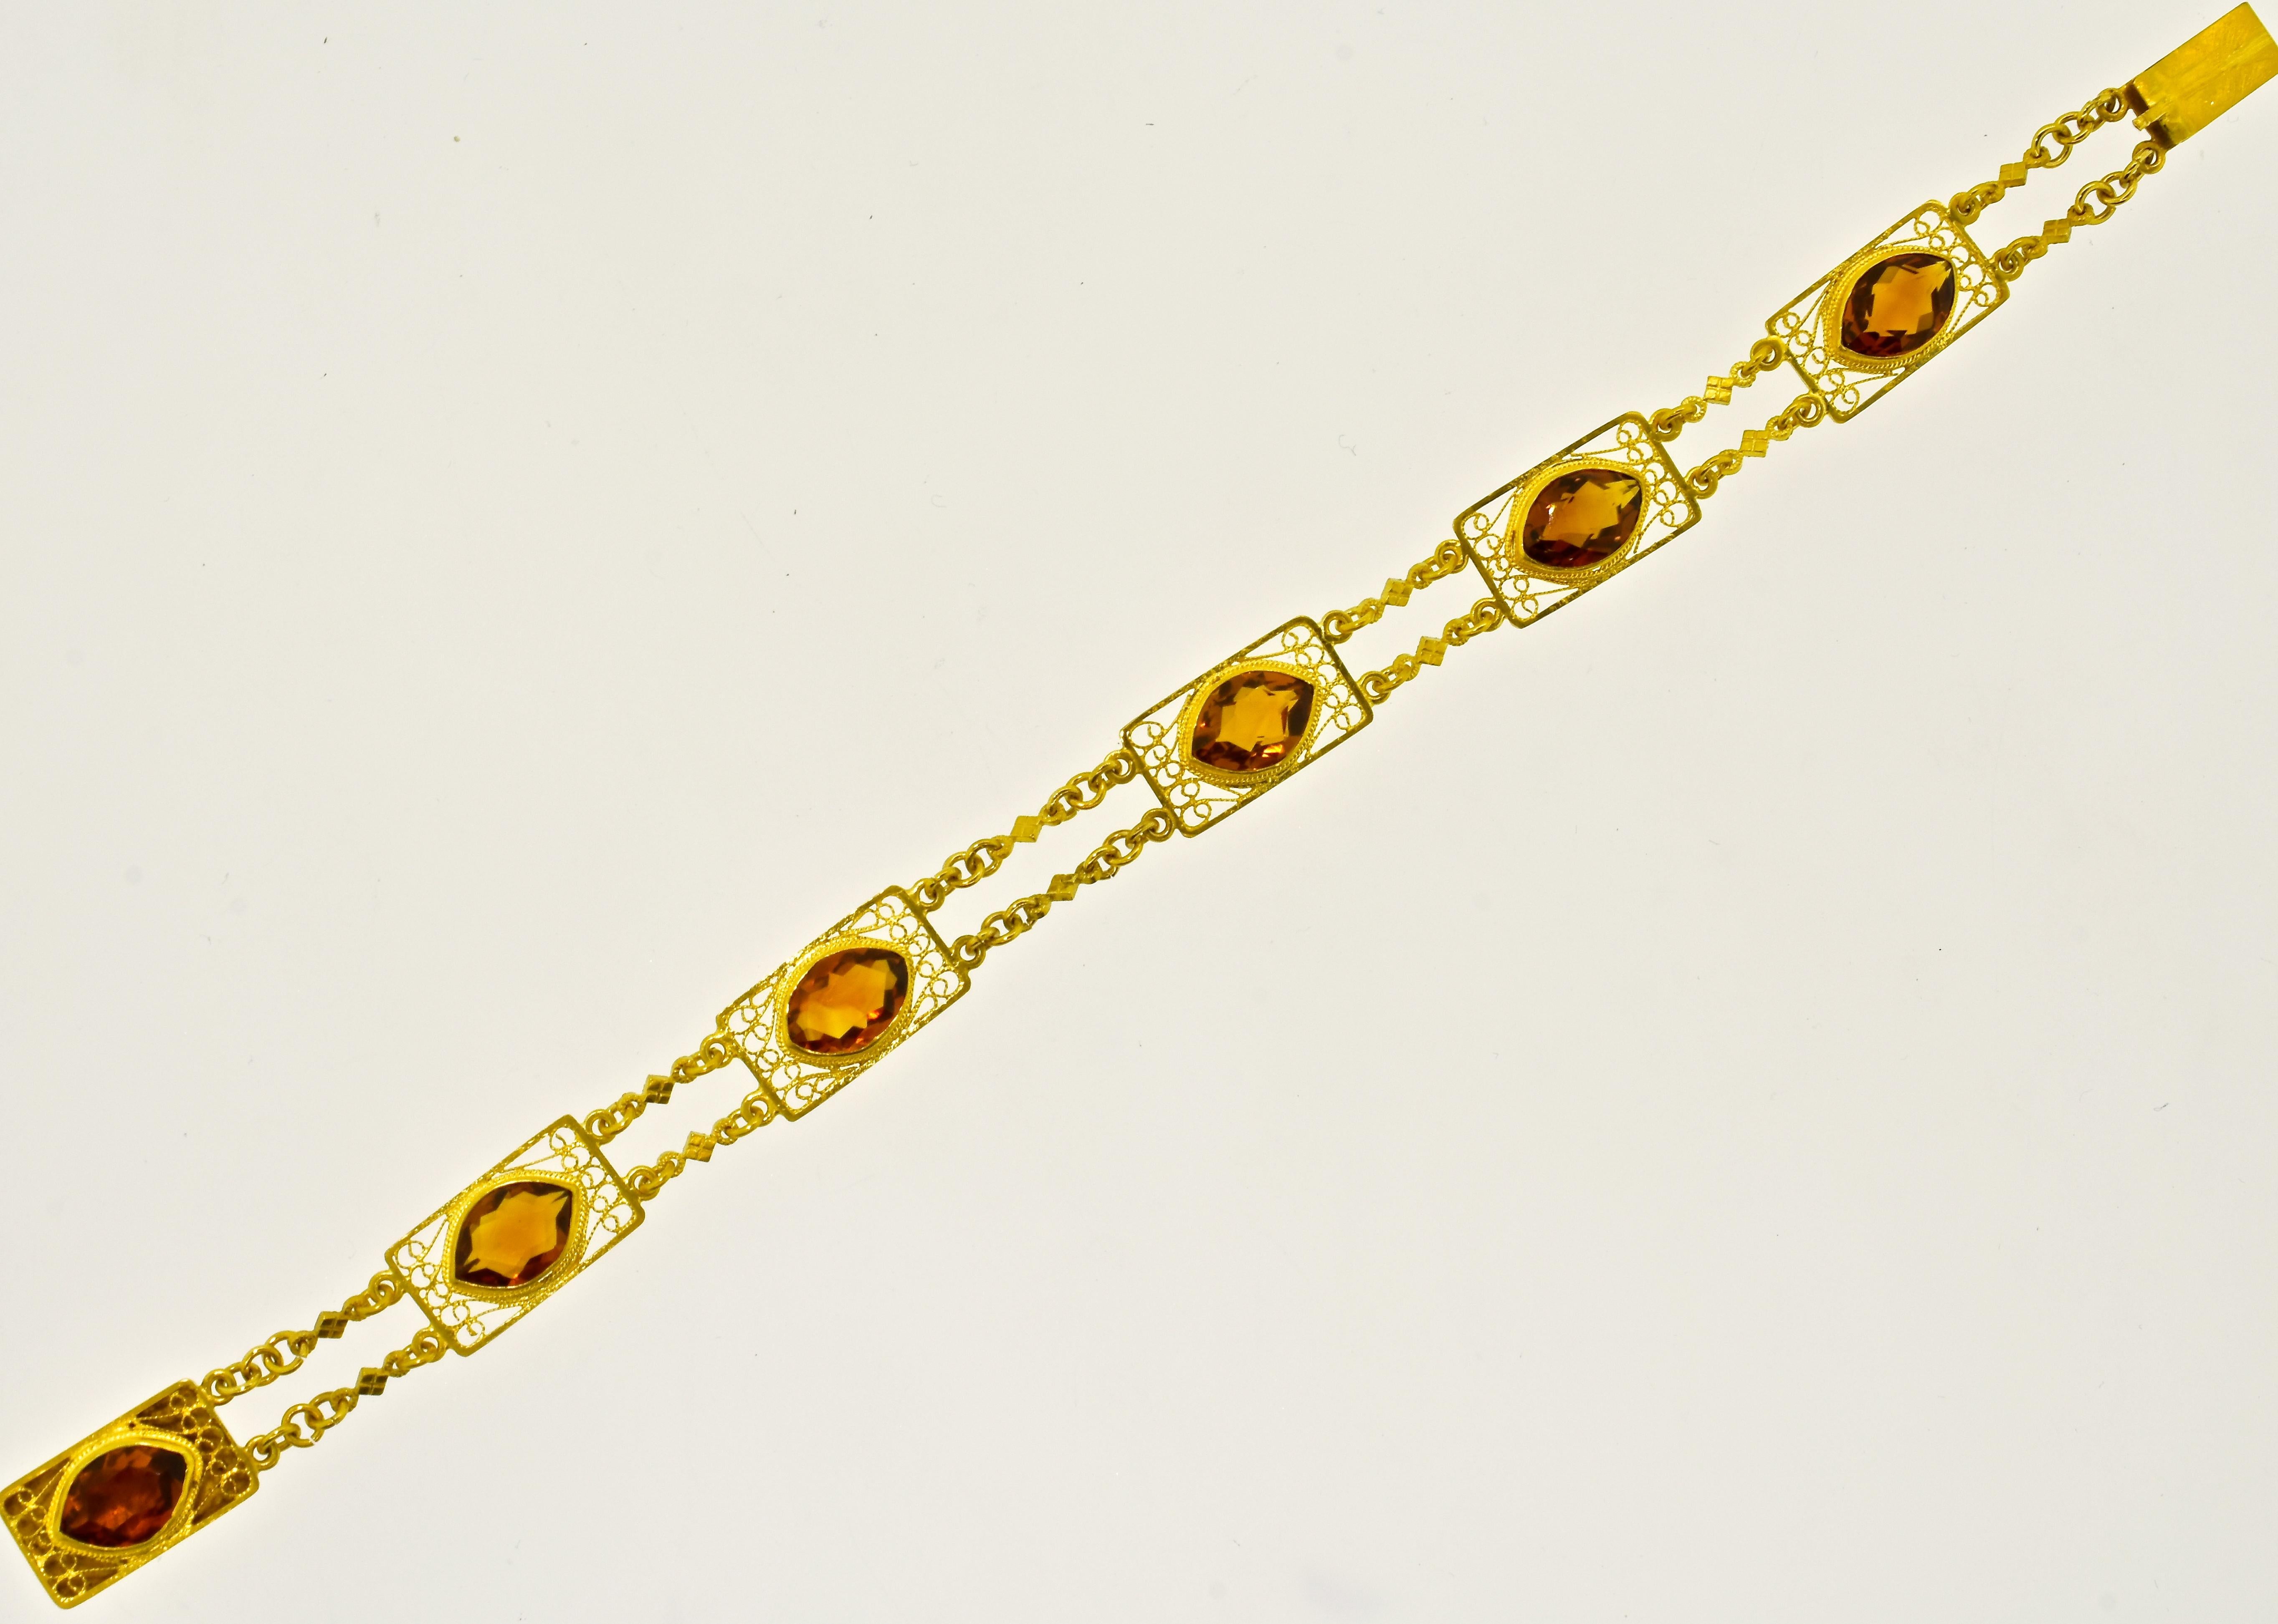 Marquise Cut Antique Yellow Gold and Fancy Cut Citrine Bracelet, circa 1905